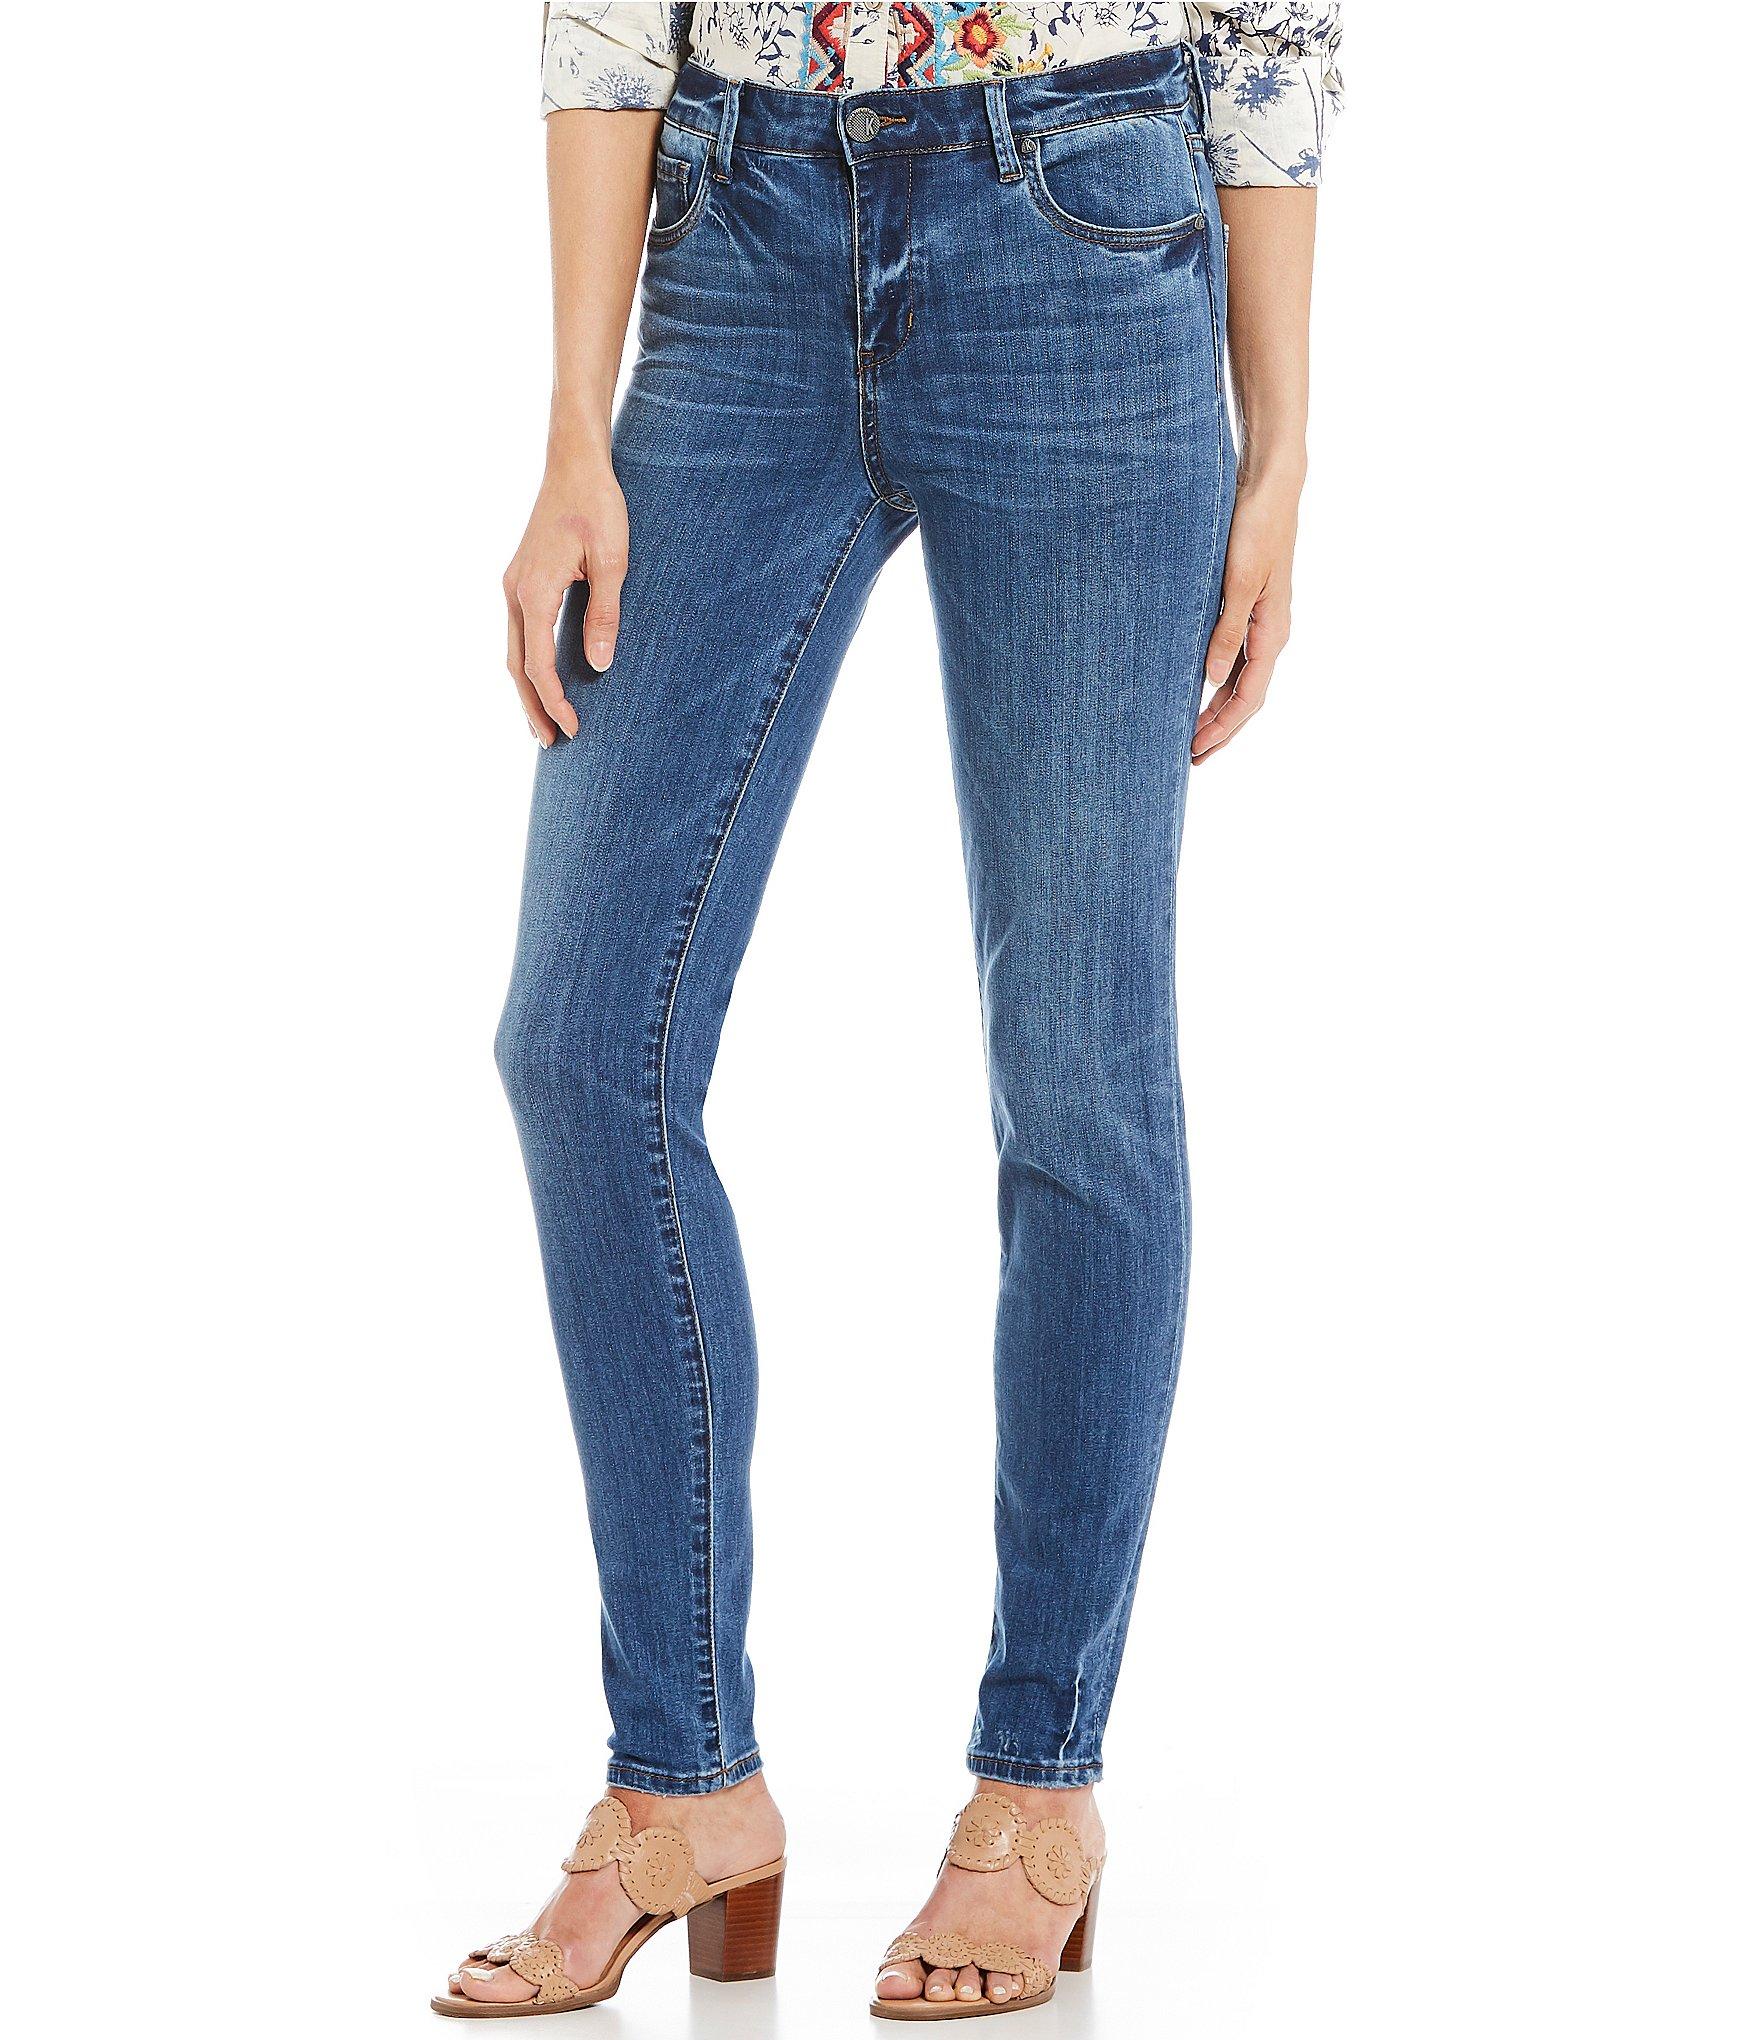 Lyst - Kut From The Kloth Mia High Rise Skinny Jeans in Blue